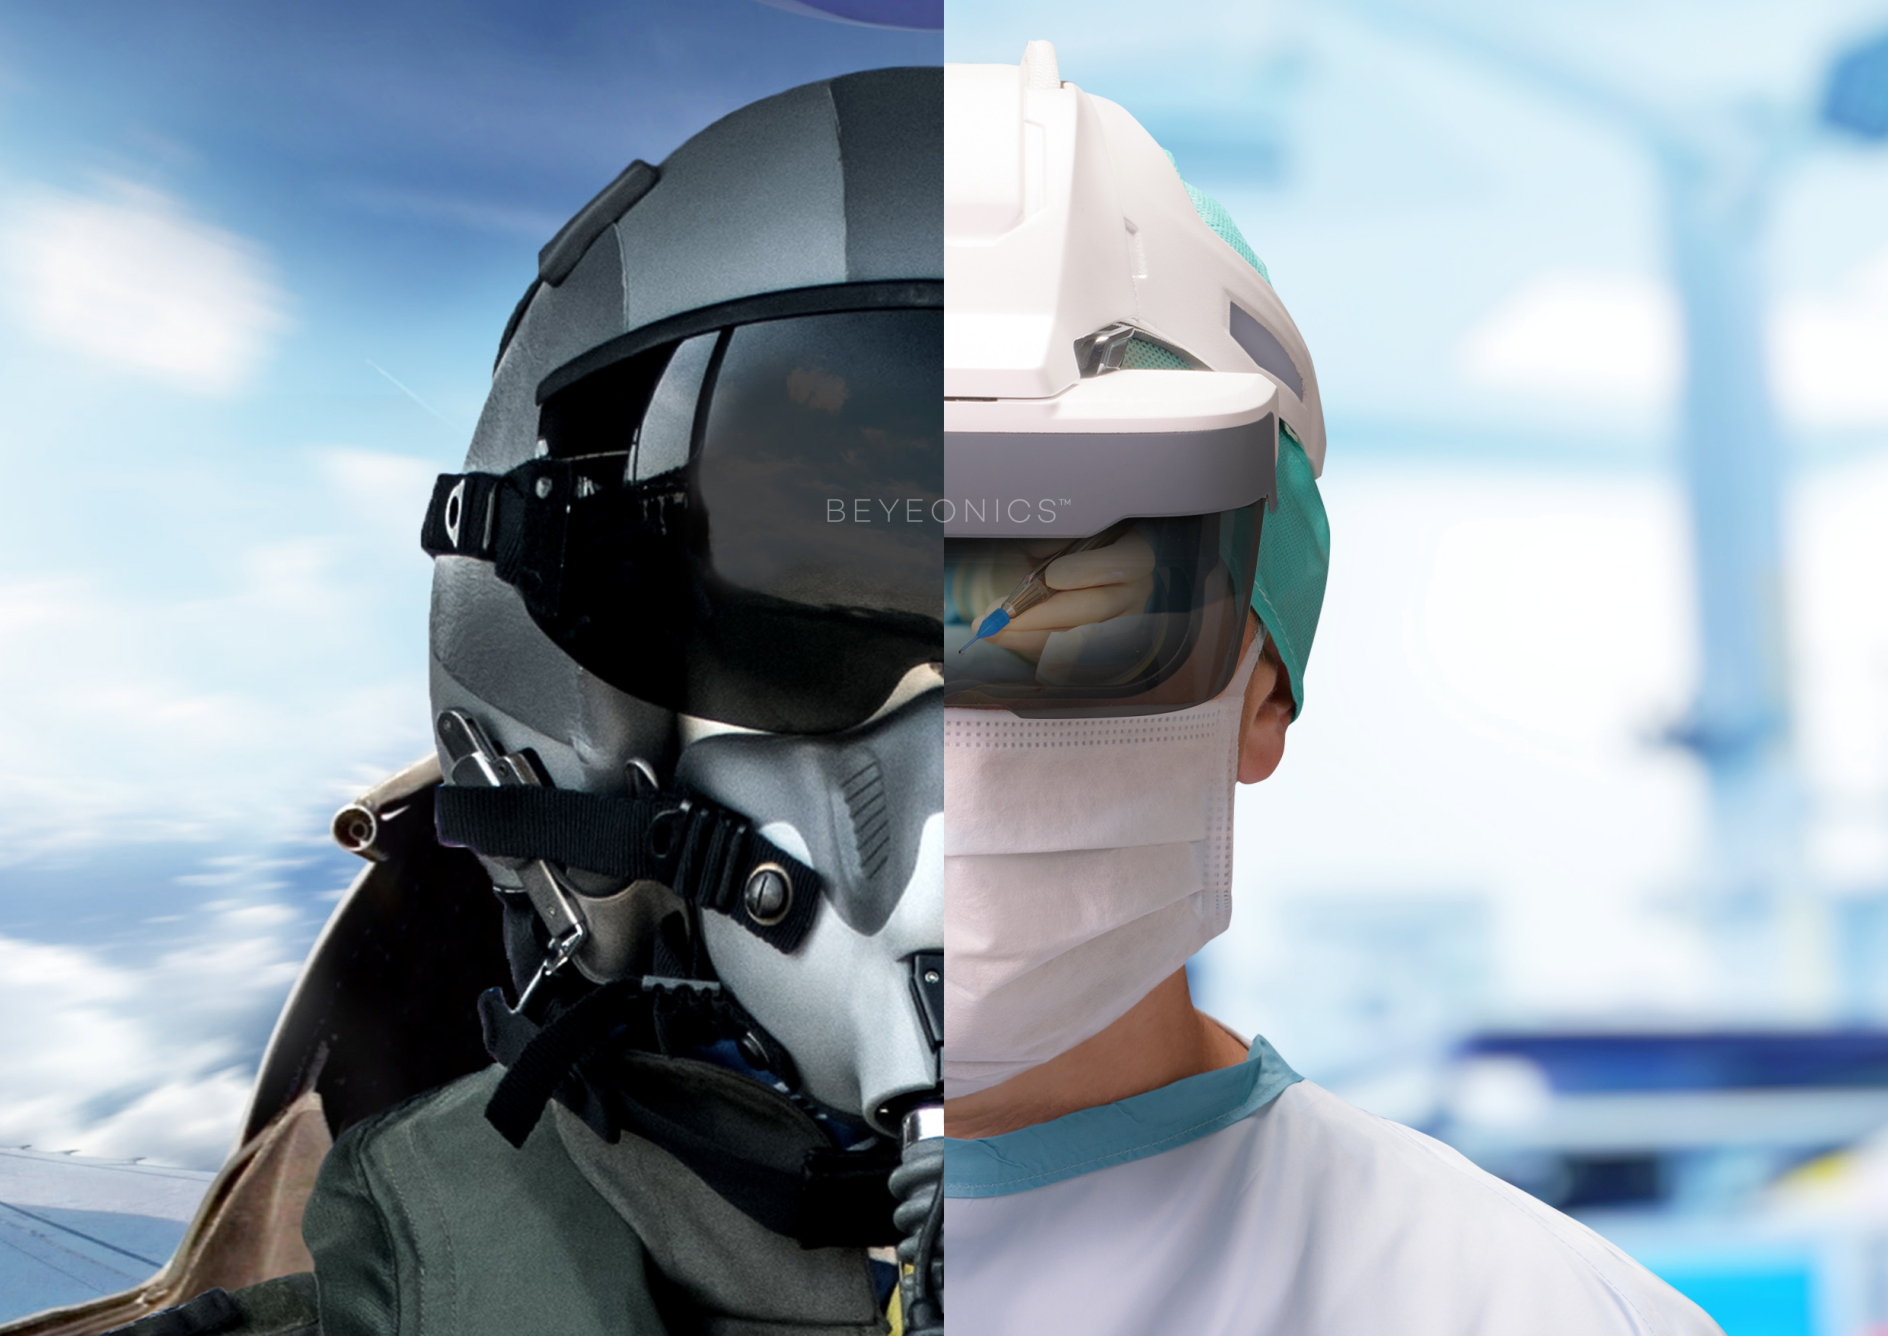 Beyeonics Surgical and Beyeonics Vision are medical technology companies that aim to interface the systems in operating rooms using augmented reality, tracking and image processing/AI platforms. Click to enlarge.